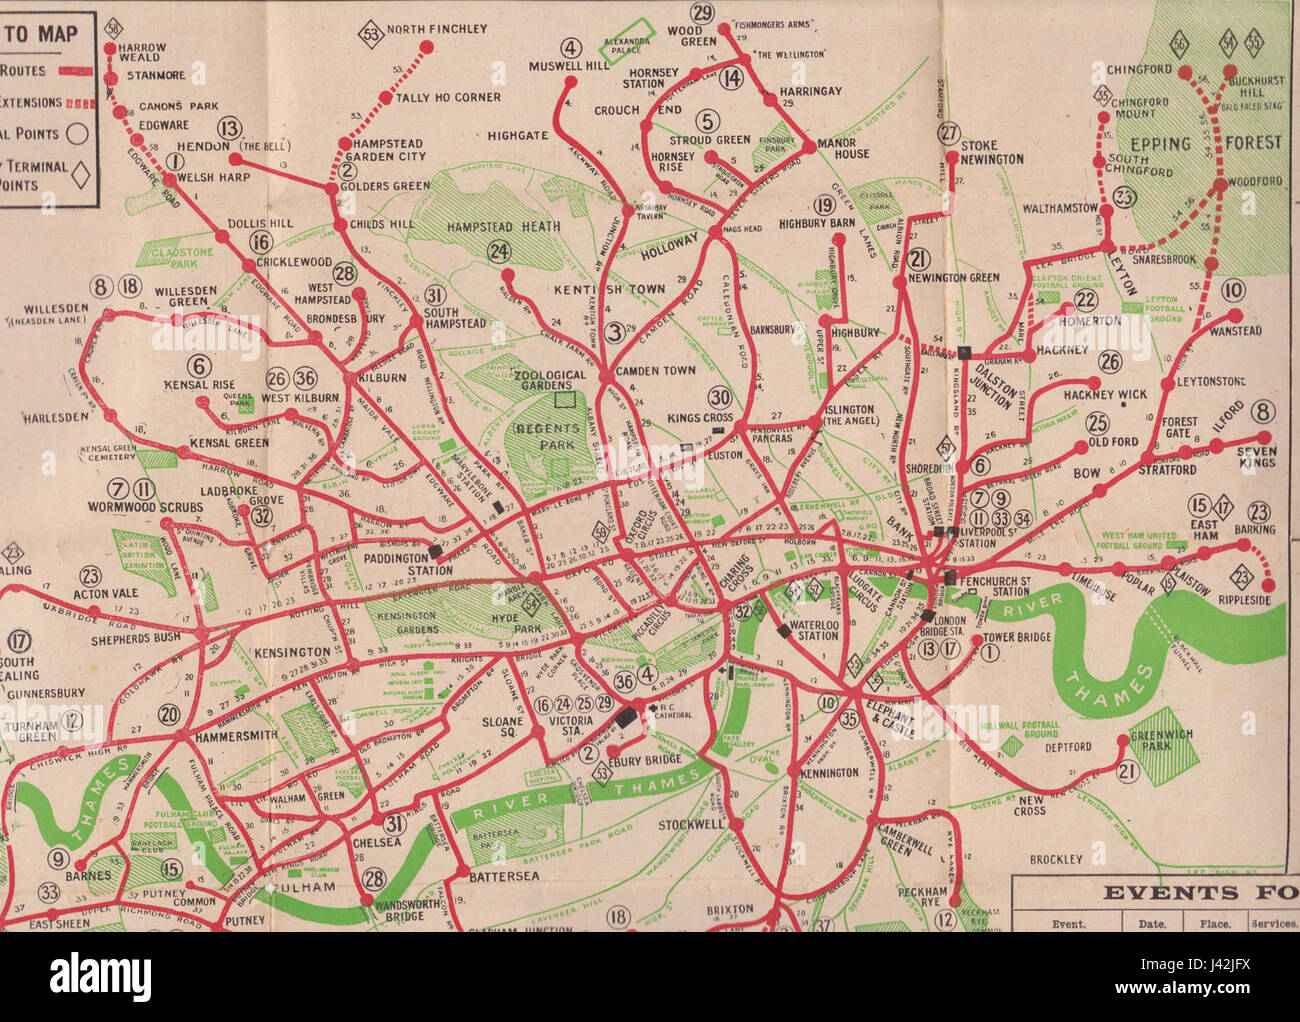 London General Omnibus Company route map May 1912 Zoom Stock Photo